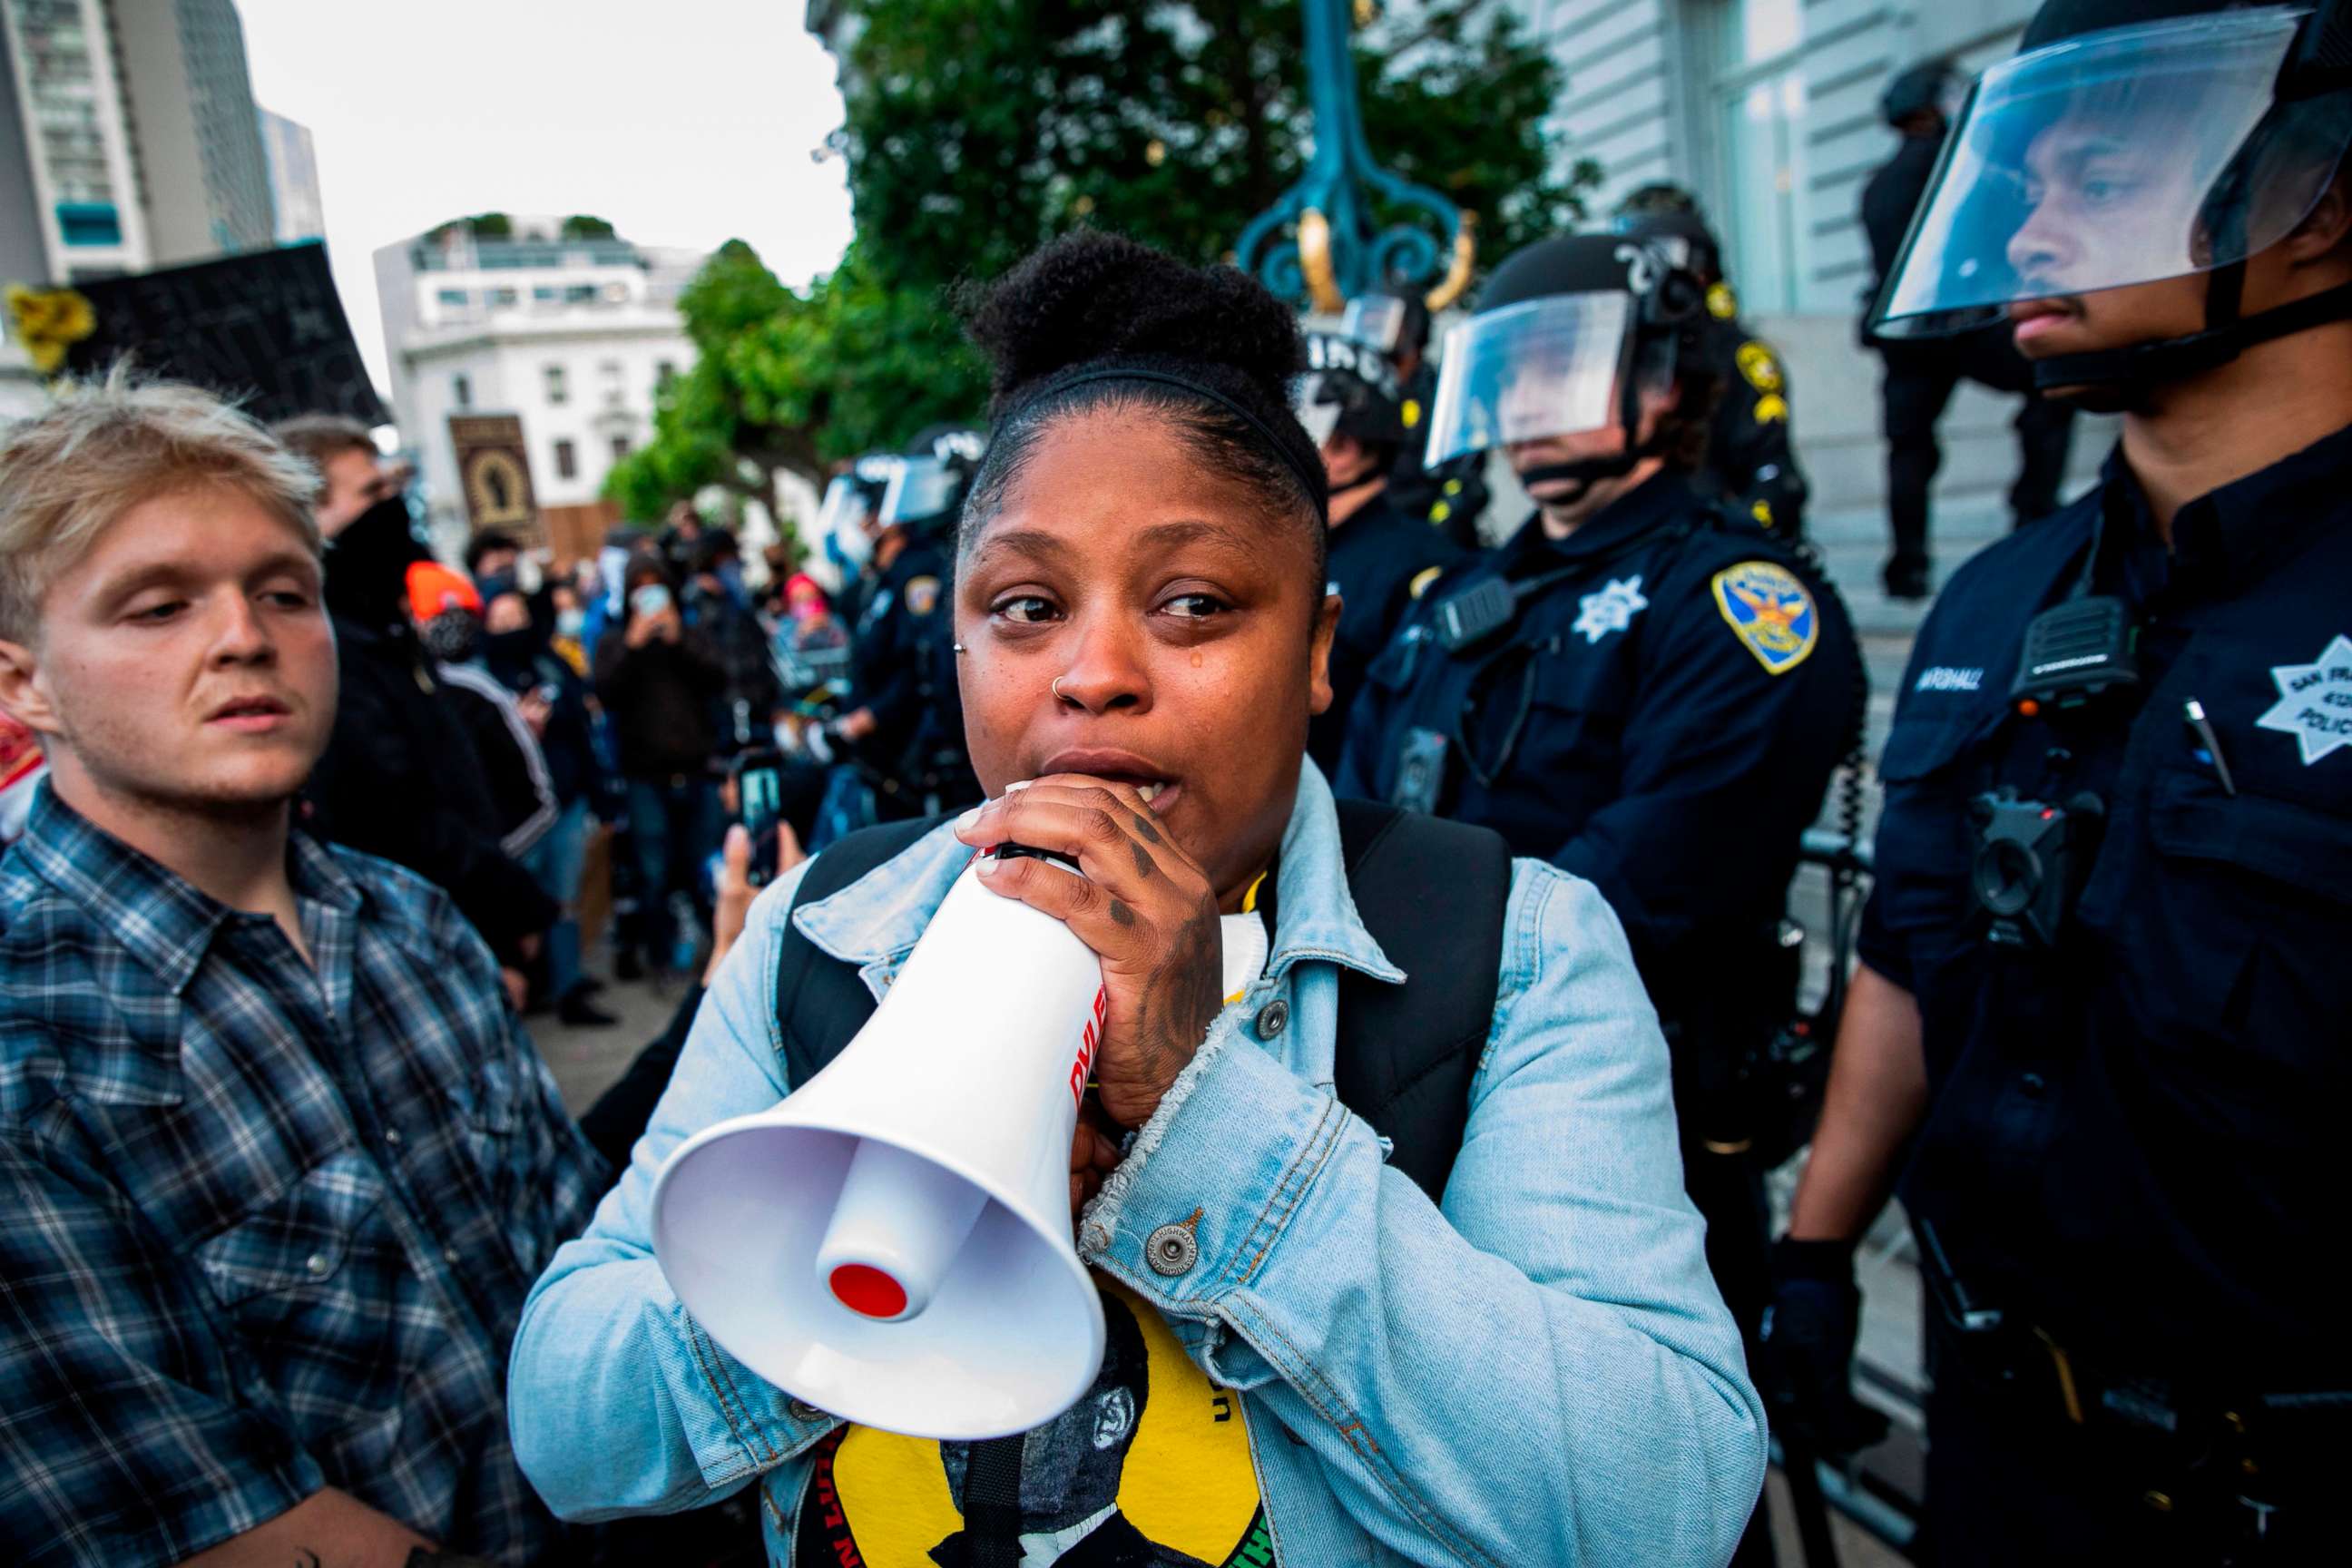 PHOTO: Marie Moroe of San Francisco, Calif., pleads with demonstrators to leave the scene before curfew, during a protest over the police killing of George Floyd, outside City Hall in San Francisco, May 31, 2020.